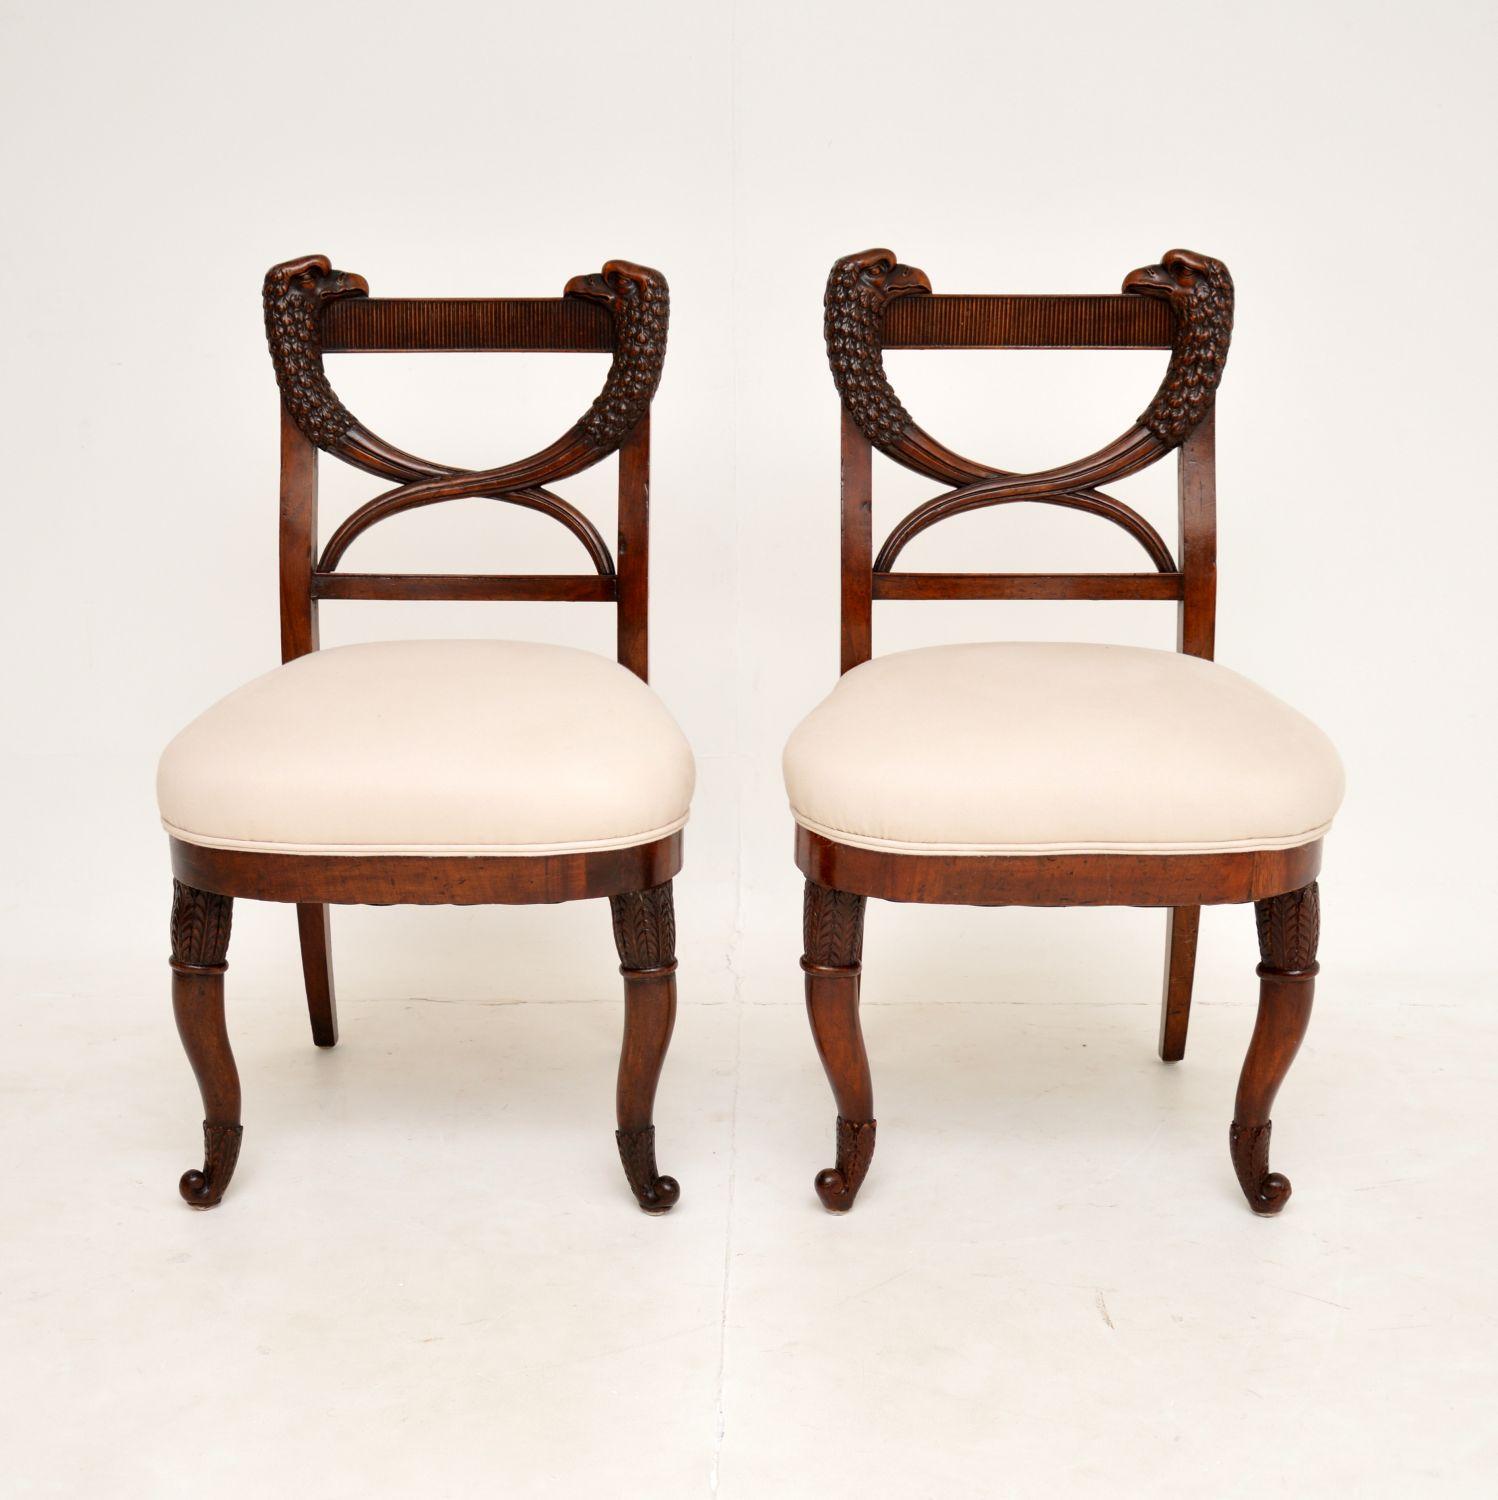 A fantastic pair of antique side chairs. They were made in continental Europe, possibly Denmark, or somewhere close and they are quite early, dating from around the 1790-1820 period, or even earlier.

The quality is outstanding, they have gorgeous